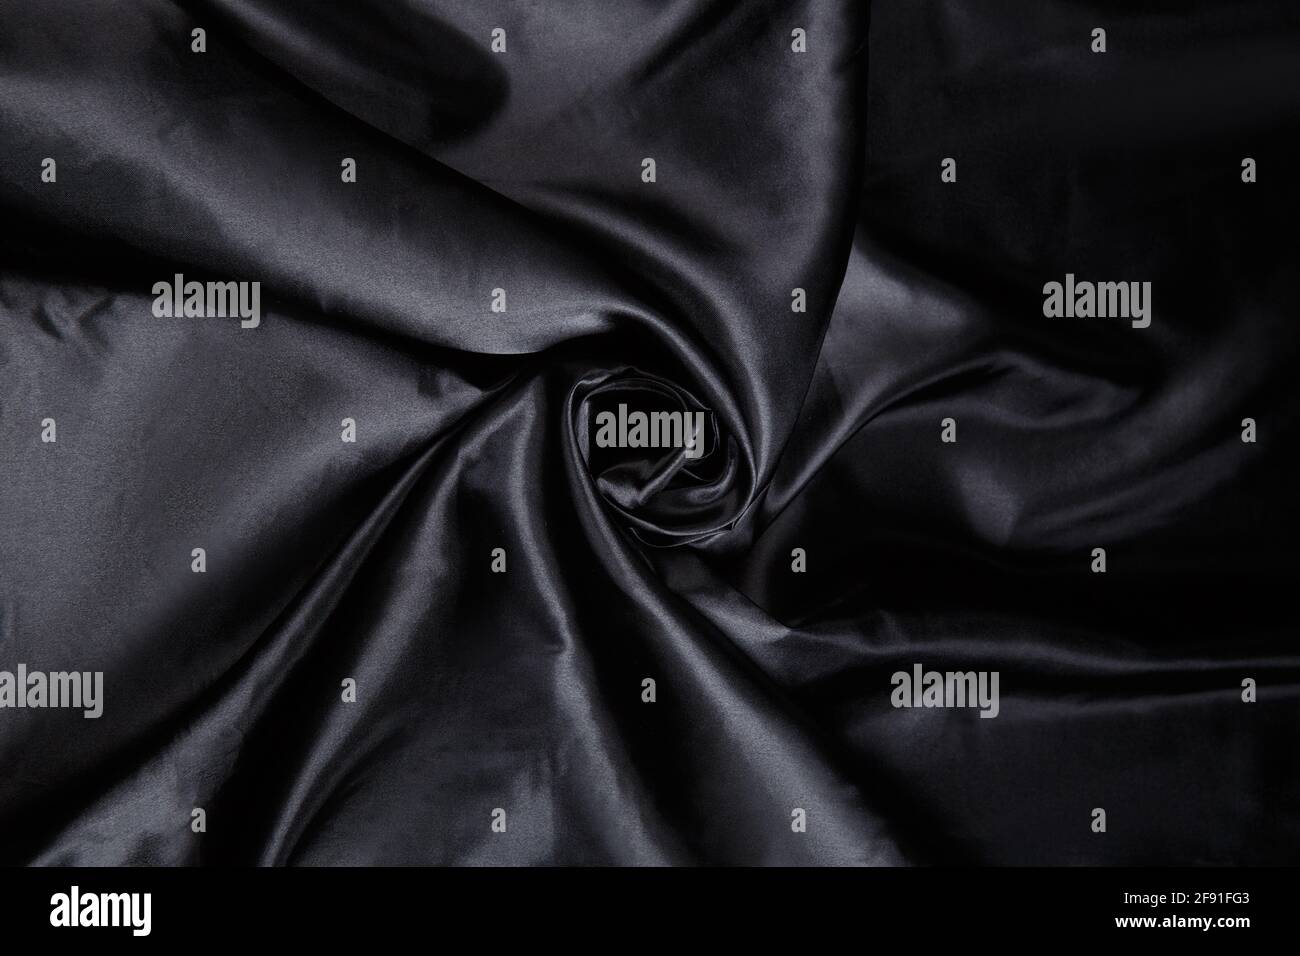 https://c8.alamy.com/comp/2F91FG3/colored-black-textile-satin-fabric-folded-in-folds-and-waves-with-highlights-and-texture-shimmers-in-the-light-2F91FG3.jpg